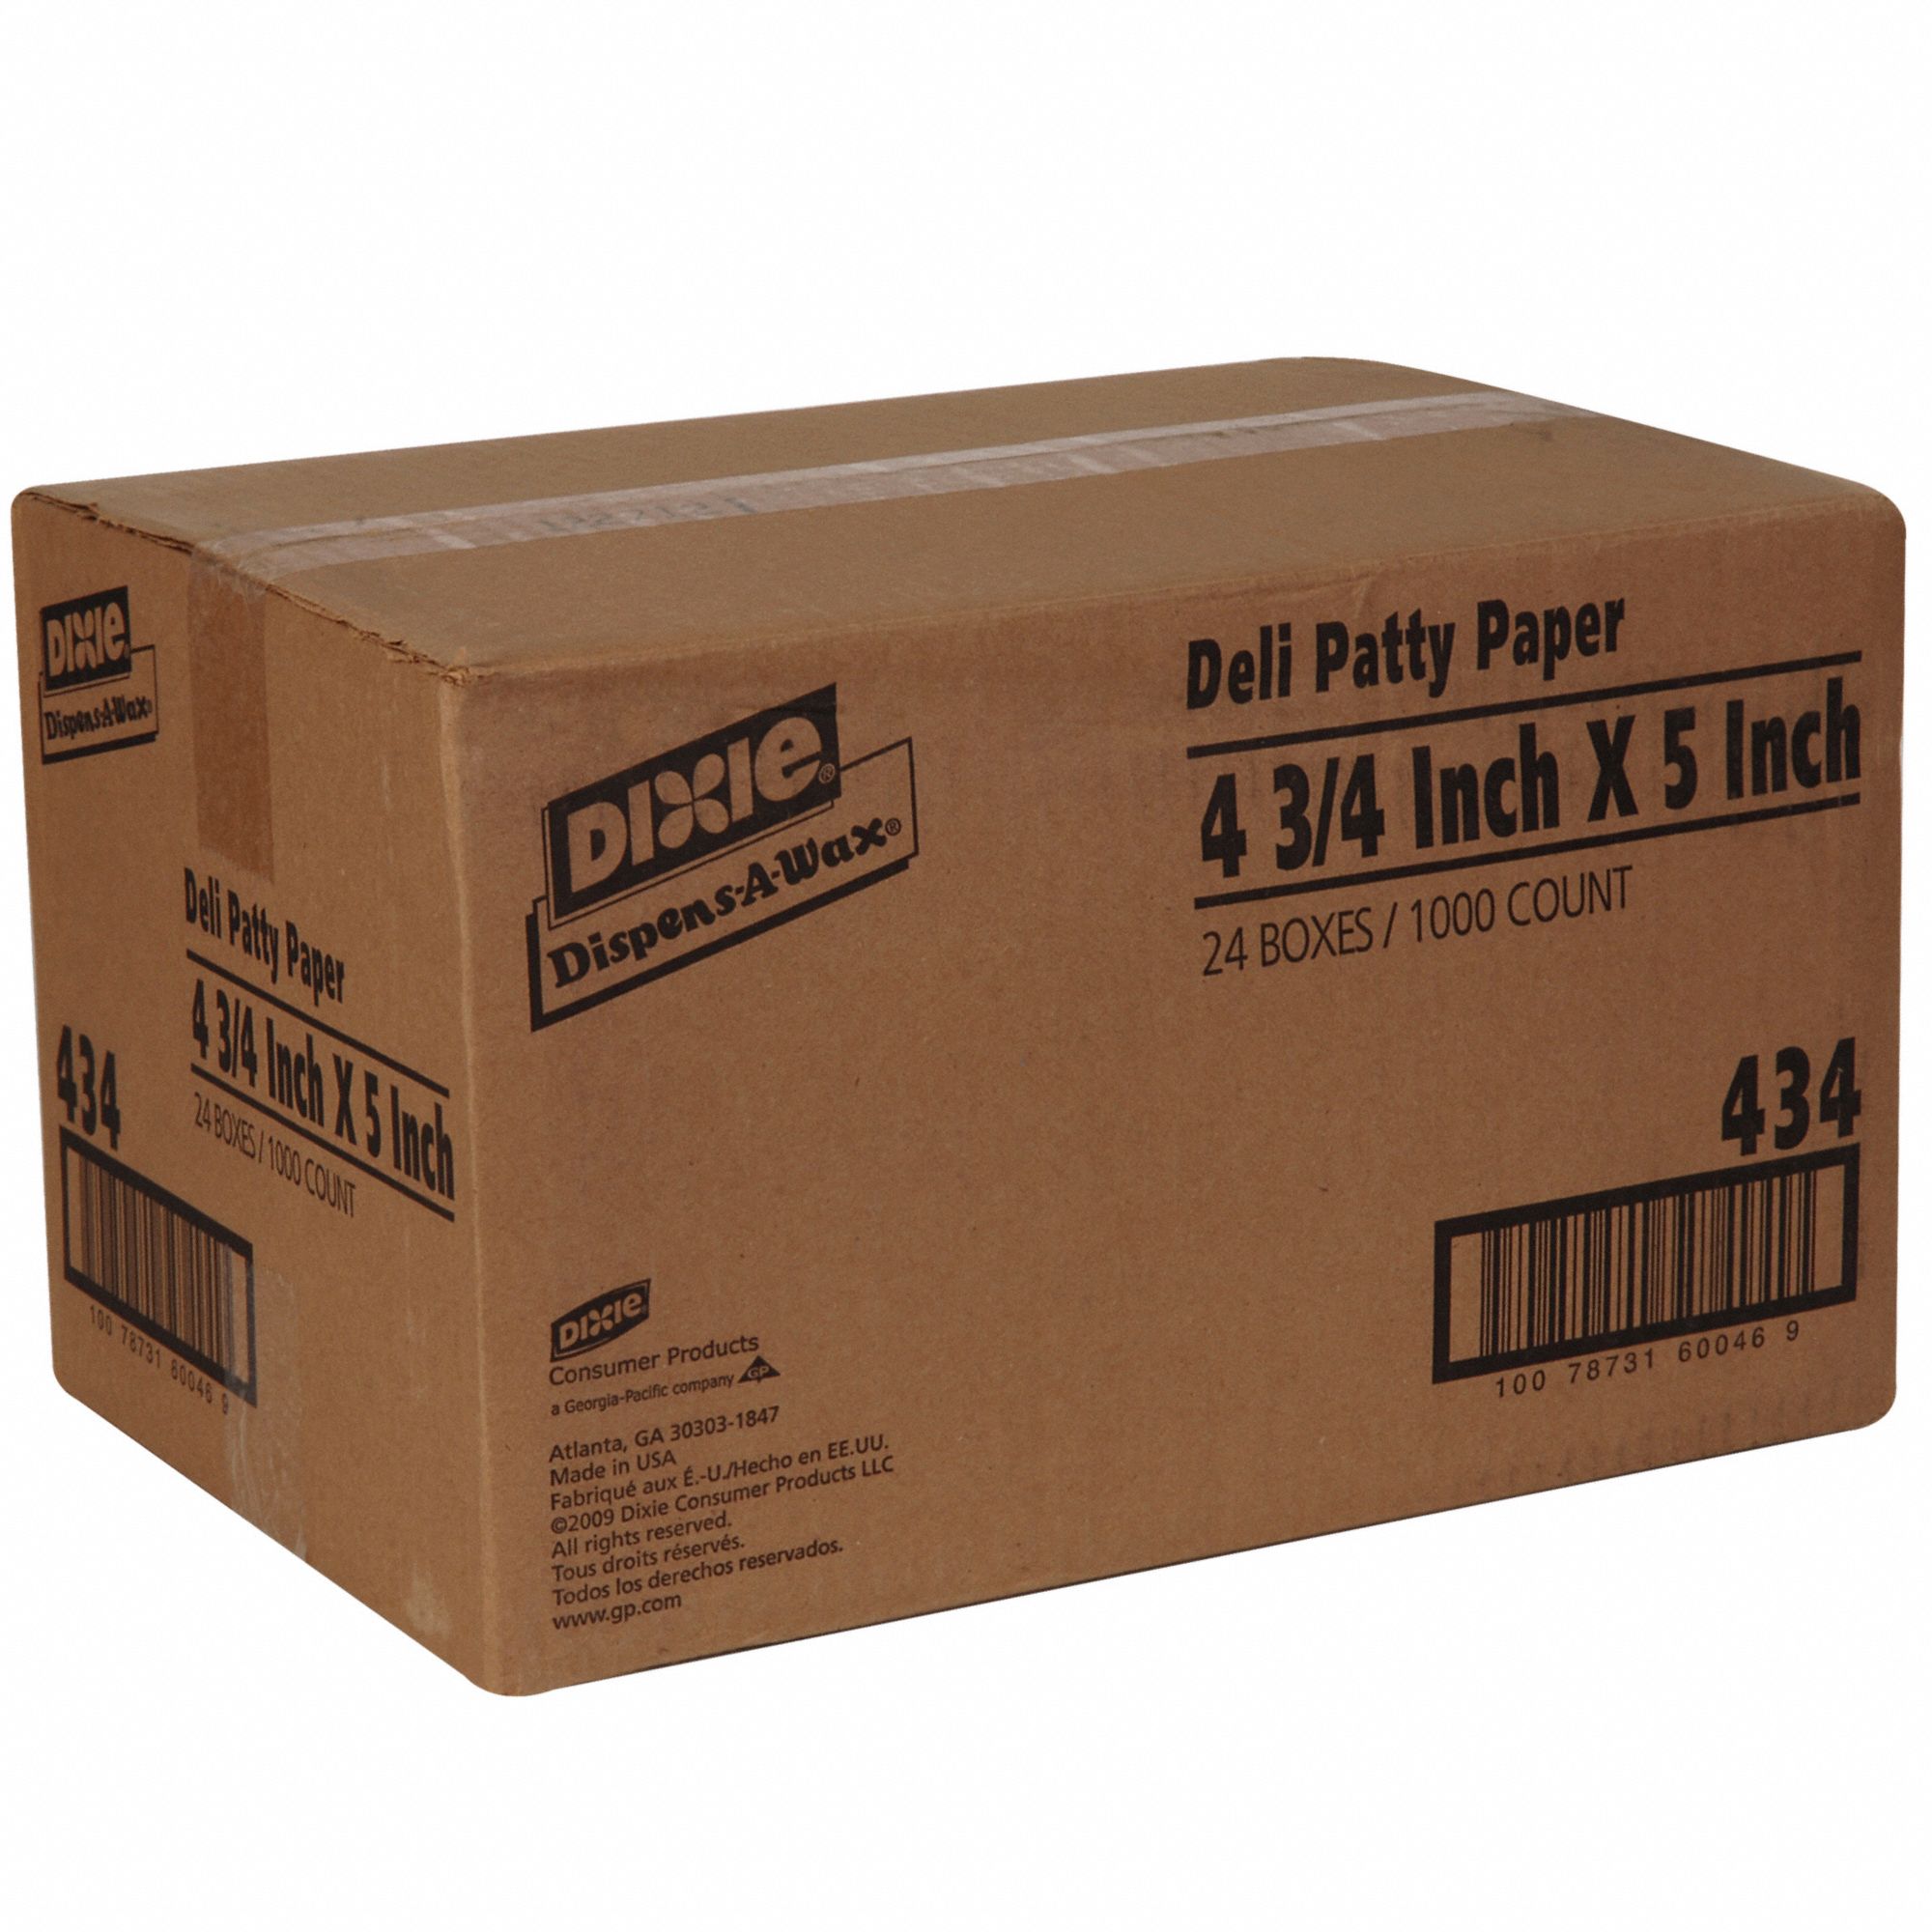 Dispens-A-Wax Waxed Deli Patty Paper Sheets by Dixie® DXE801200